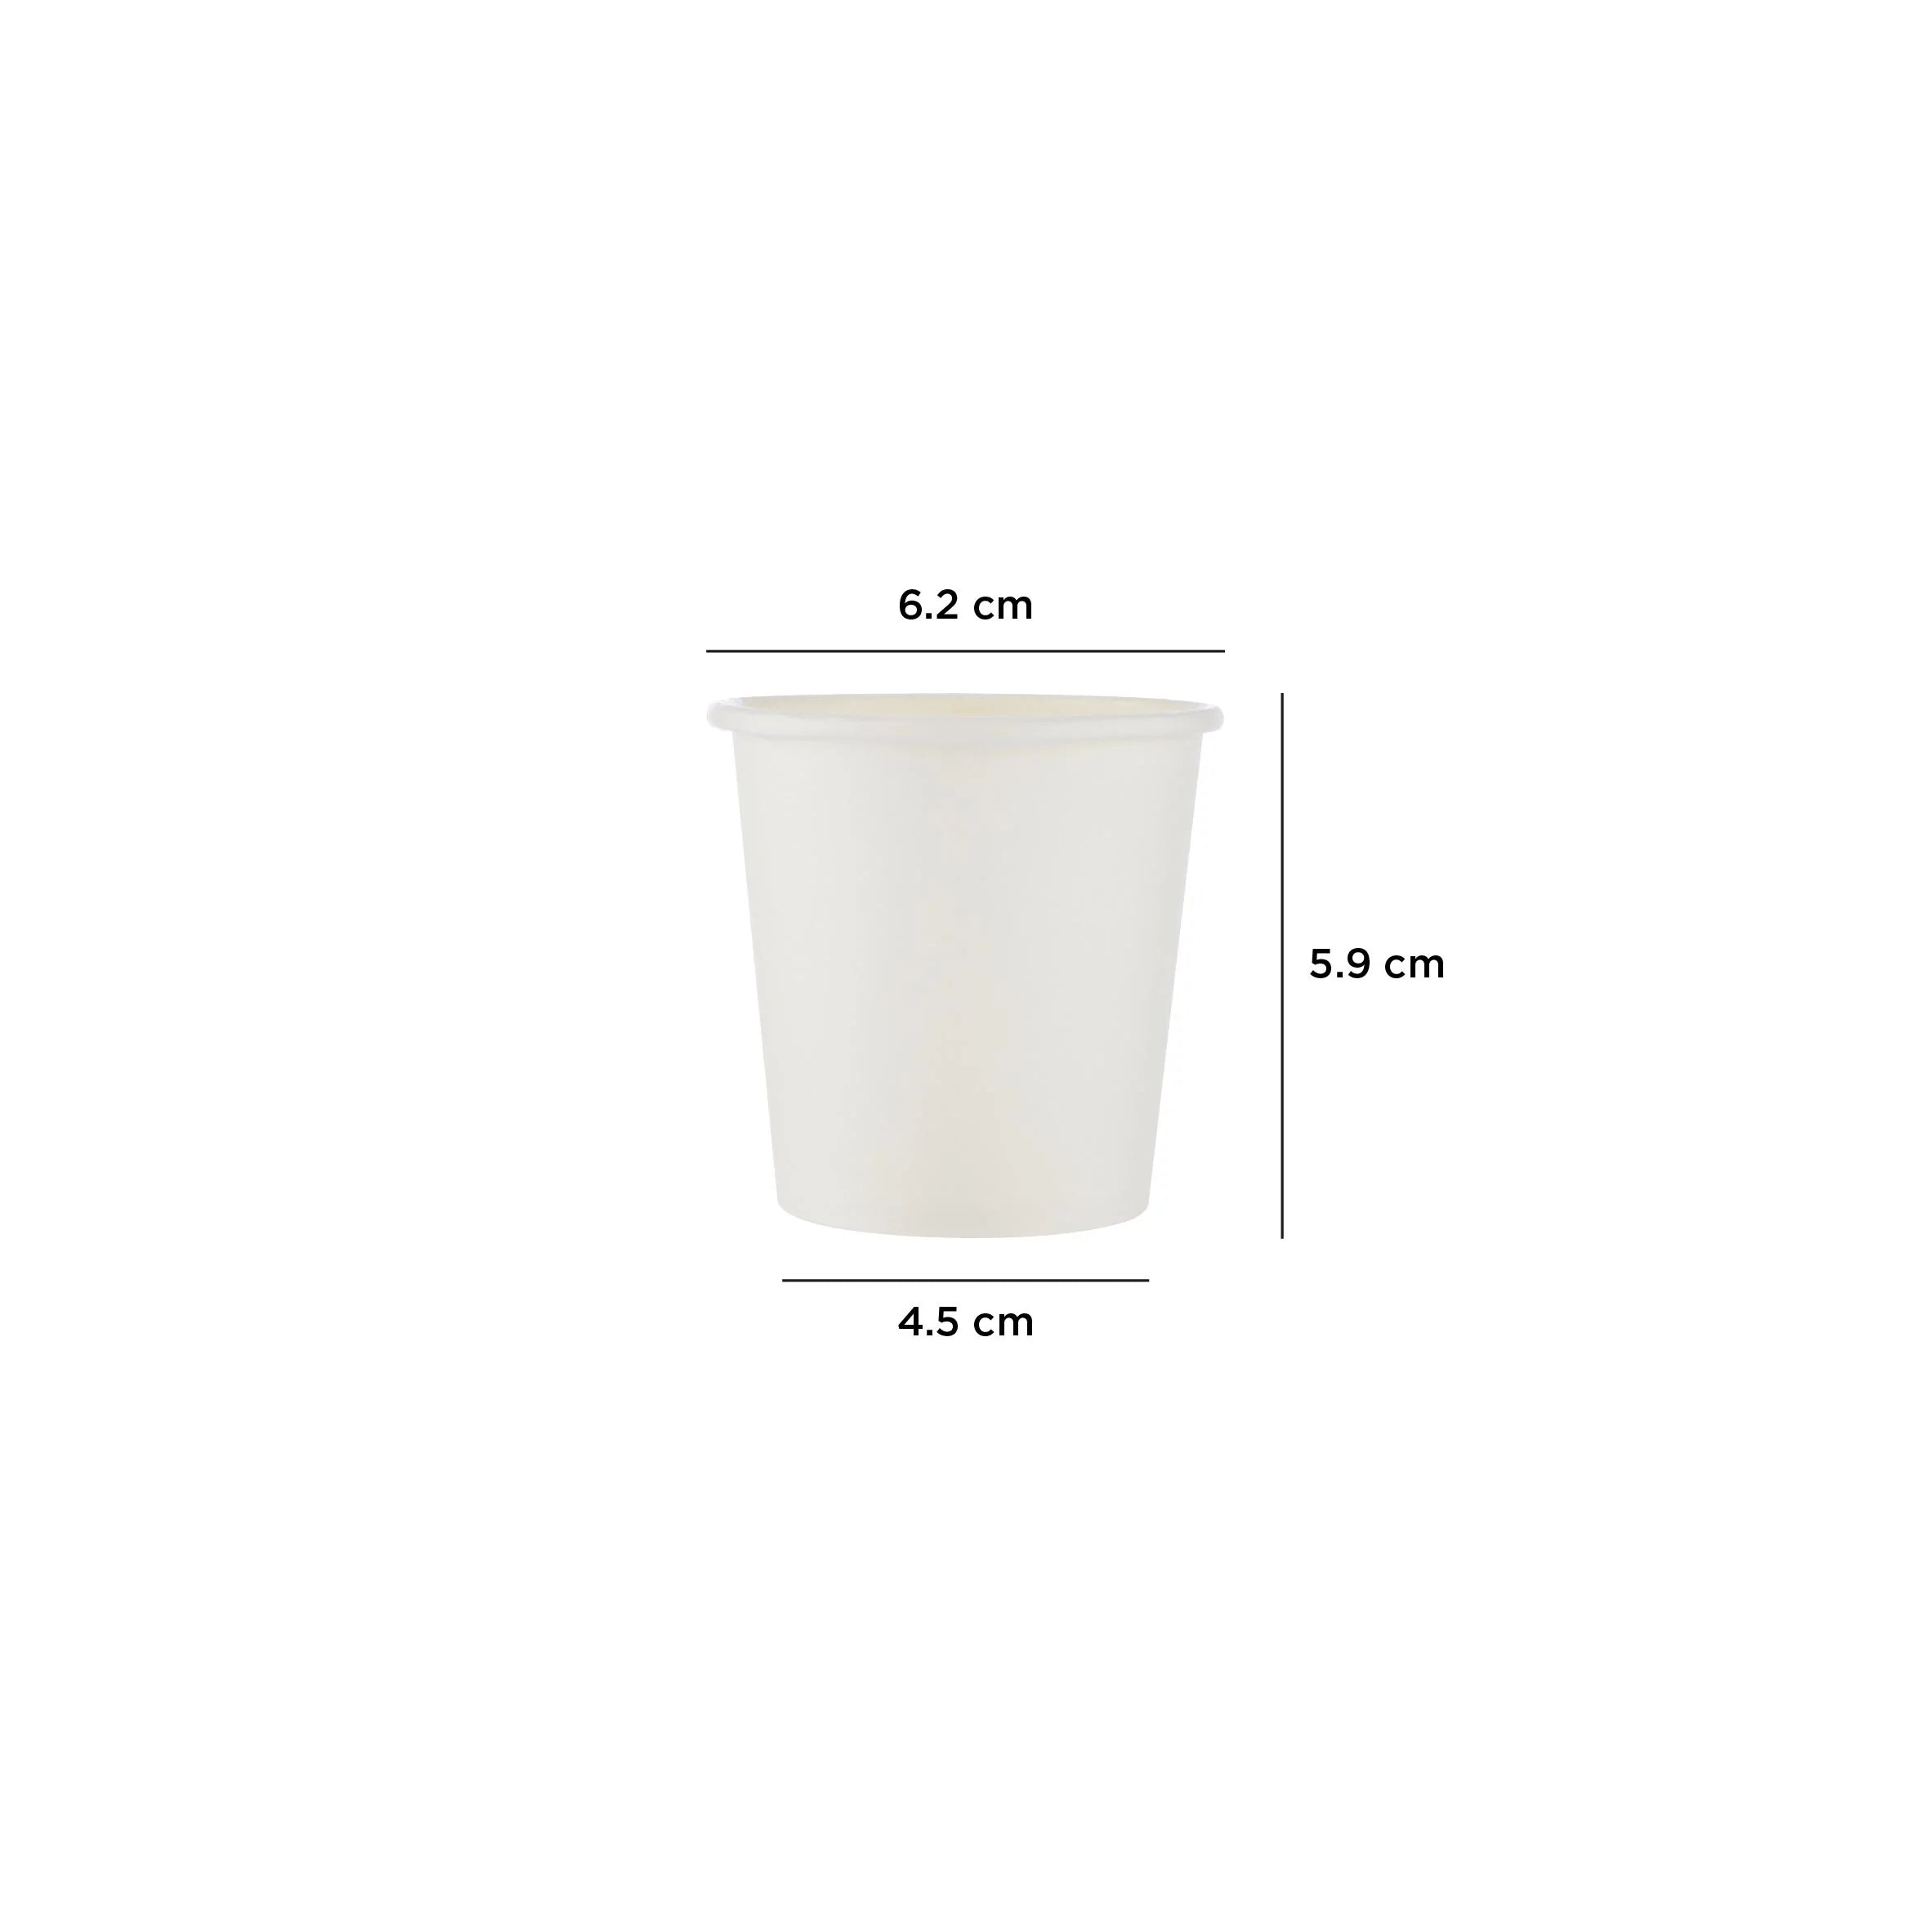 4 Oz (118 ml) Single Wall Paper Cup White| 1000 Pieces- Hotpack Bahrain